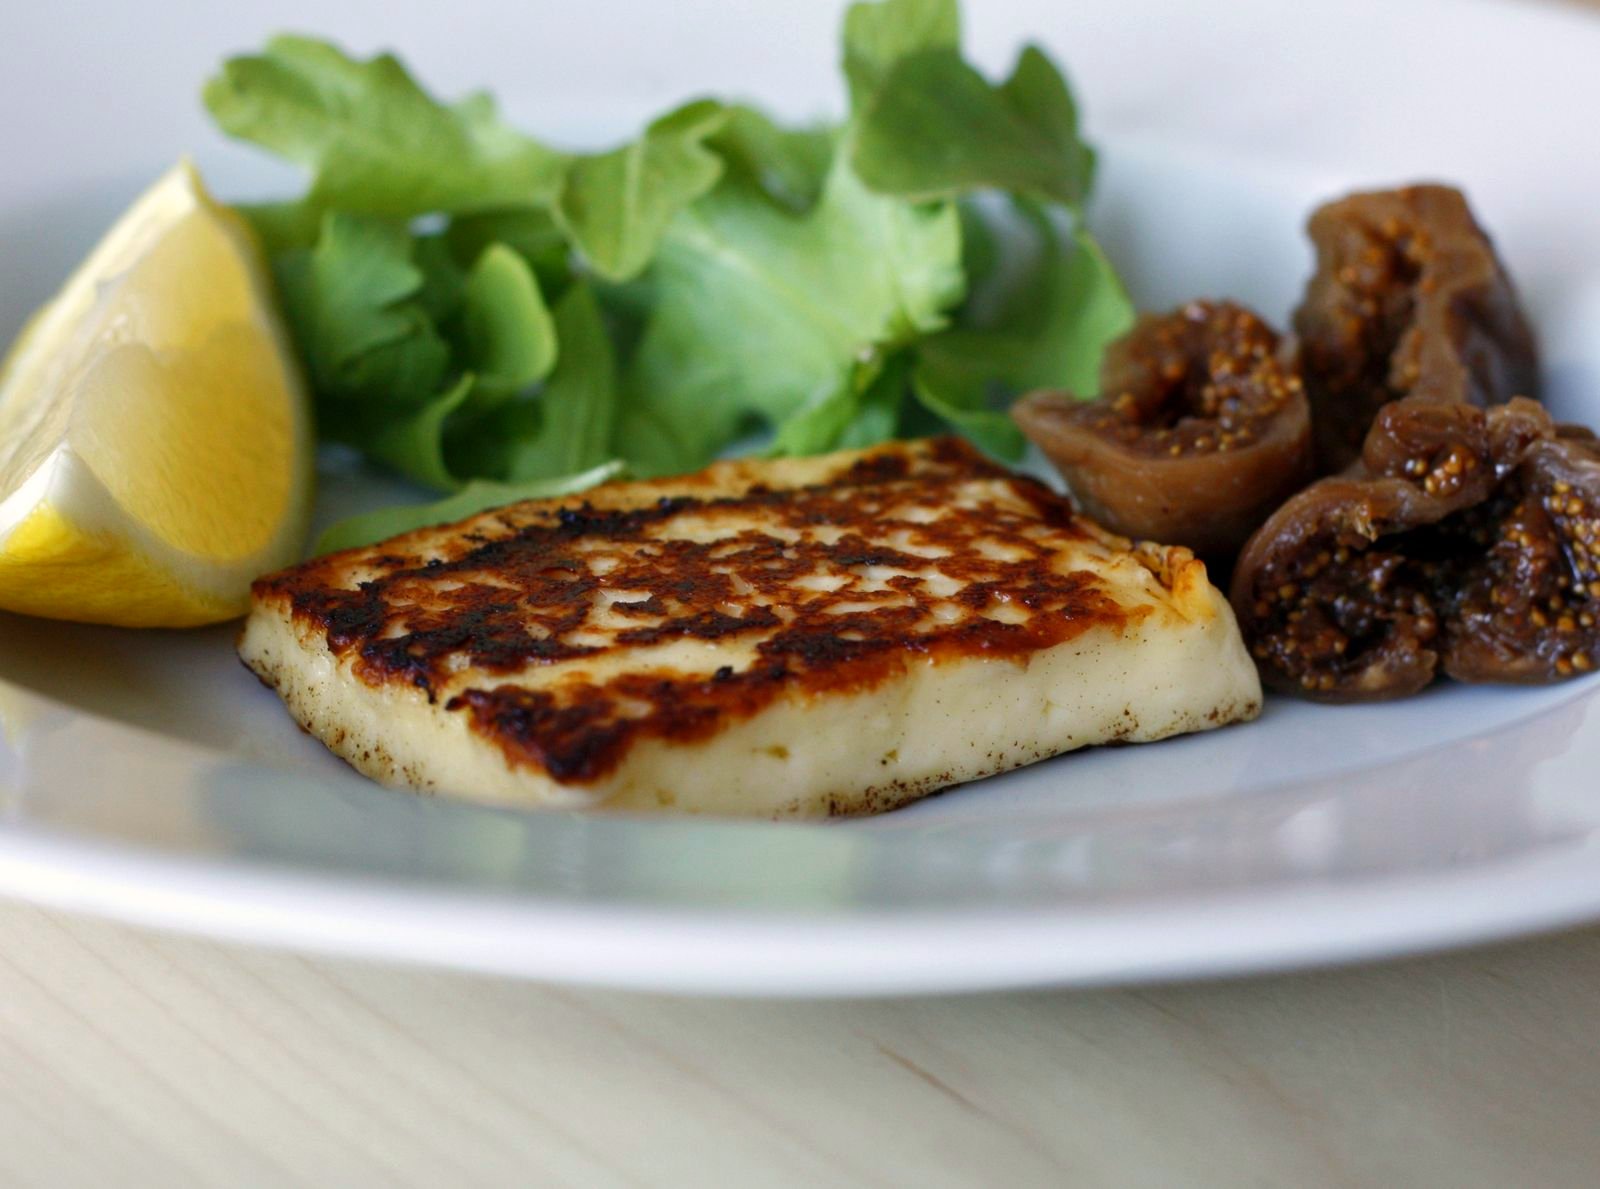 A Crafty Lass: Saganaki with Pickled Figs